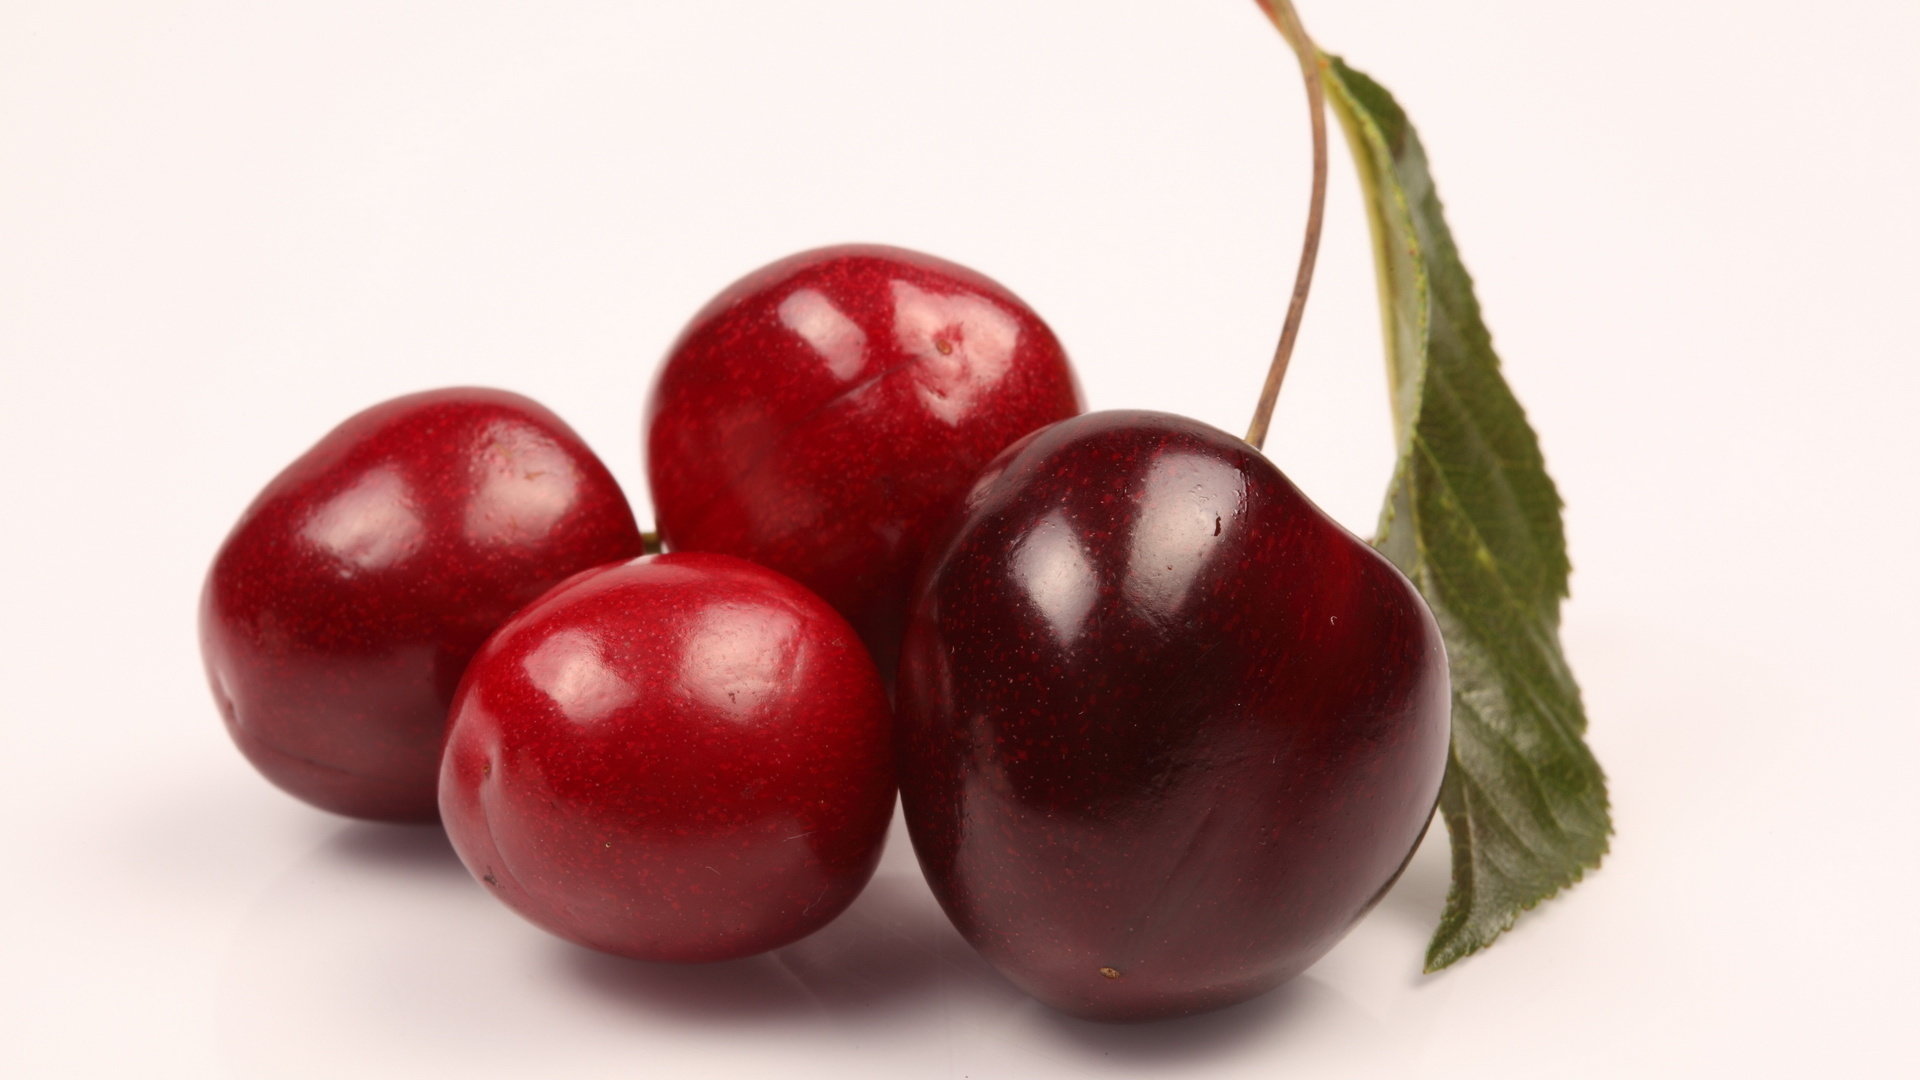 Download full hd 1920x1080 Cherry PC wallpaper ID:141813 for free